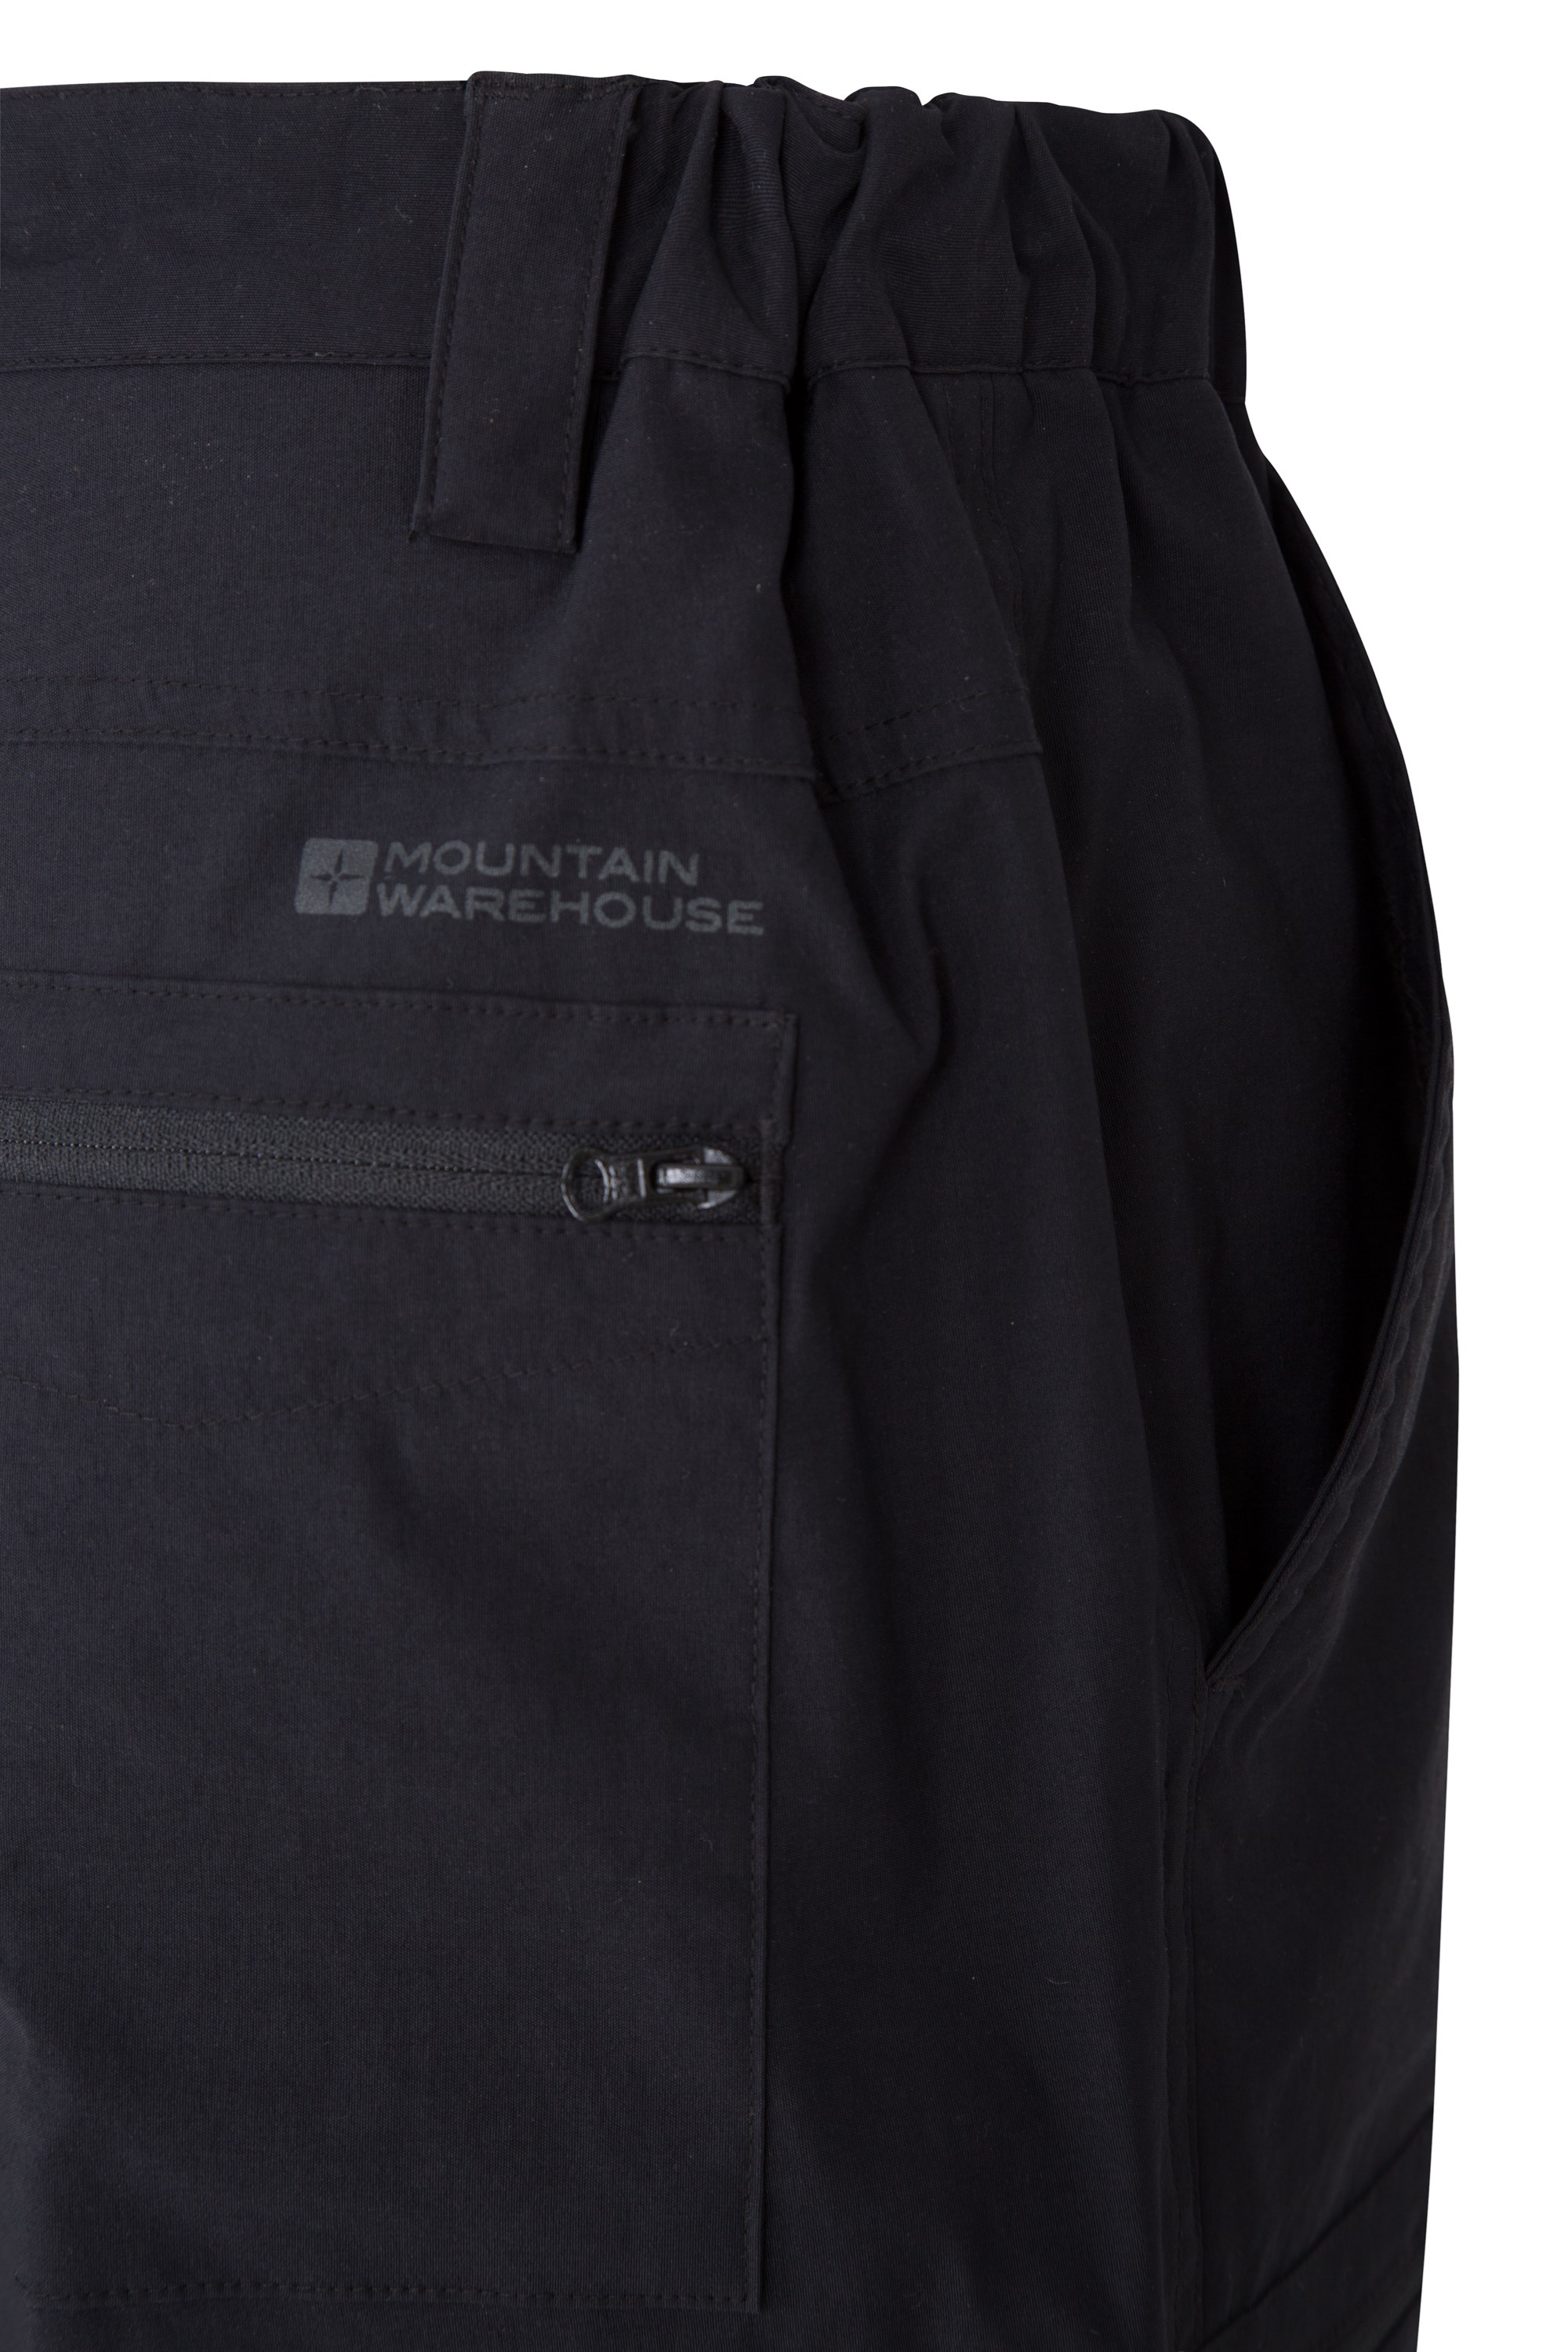 Mountain Warehouse Mountain Warehouse 10 Lined Jeans 